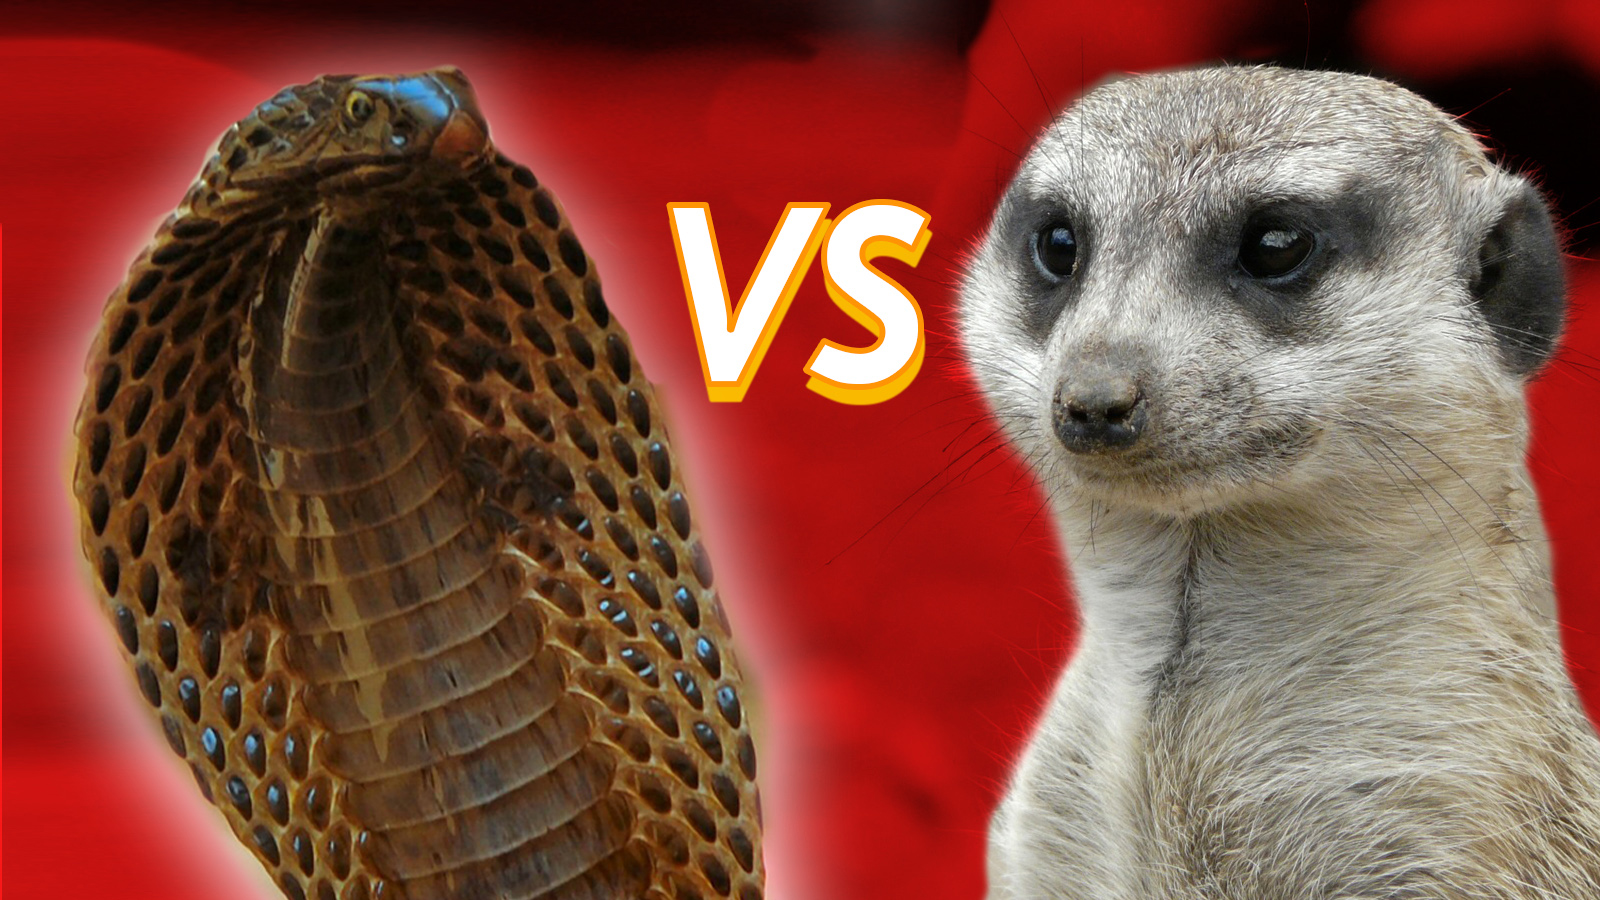 King Cobra vs Mongoose: Who Would Win in a Fight?